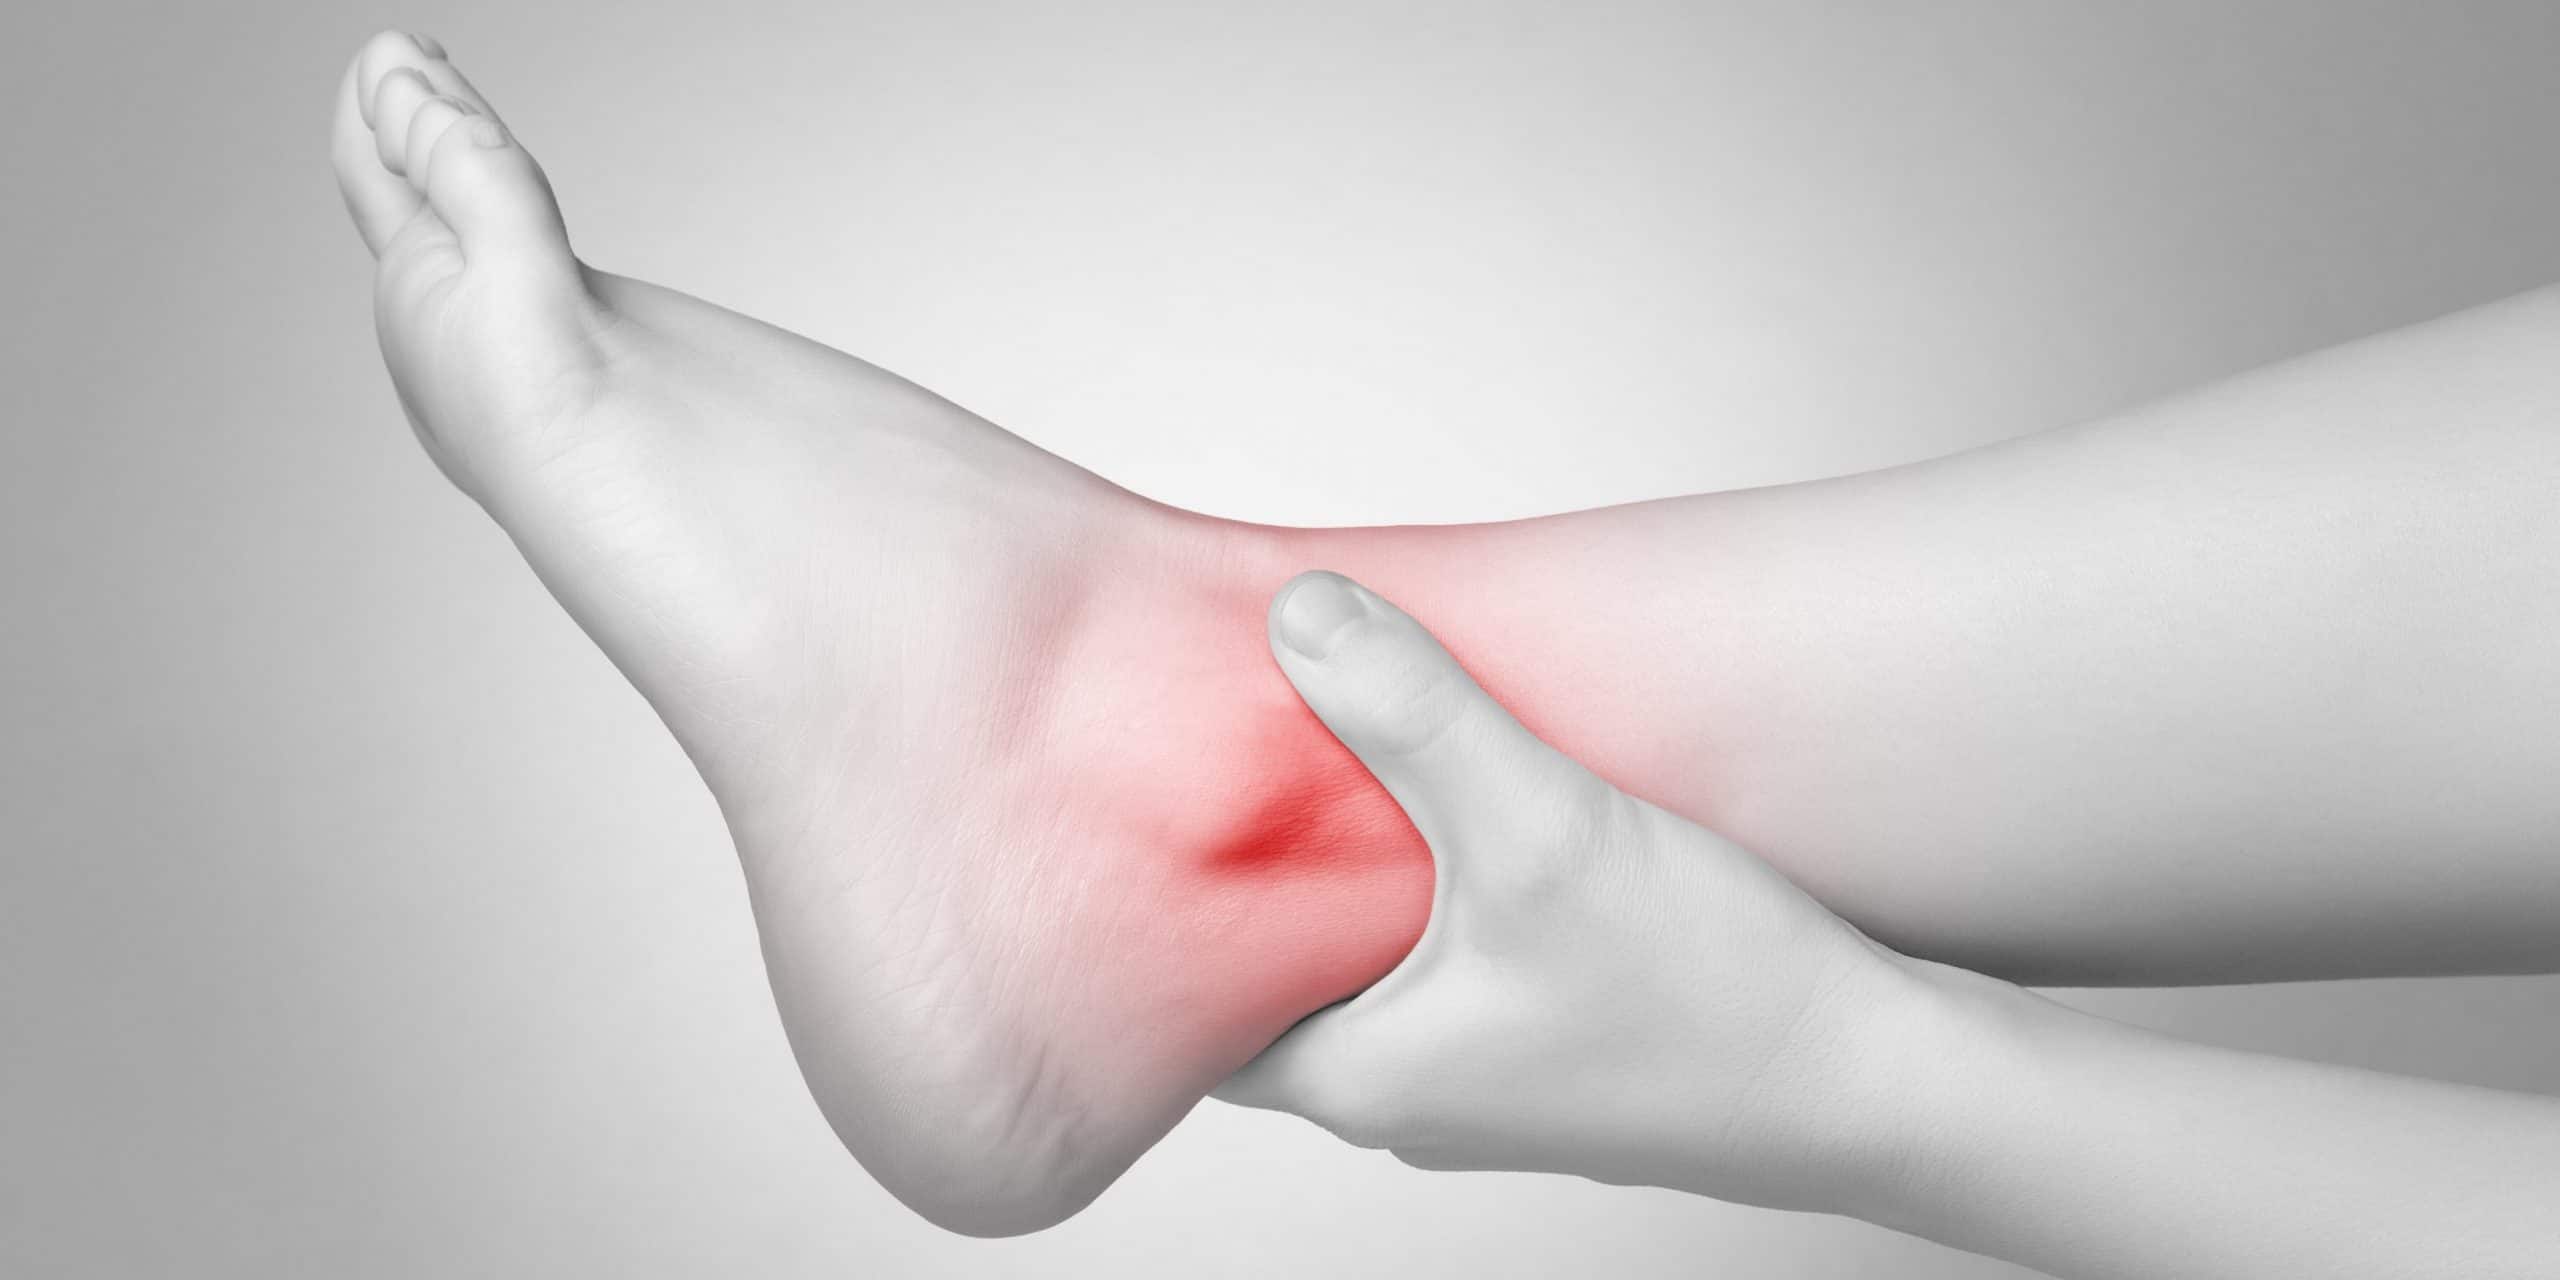 Complete Lateral Ankle Sprain Guide